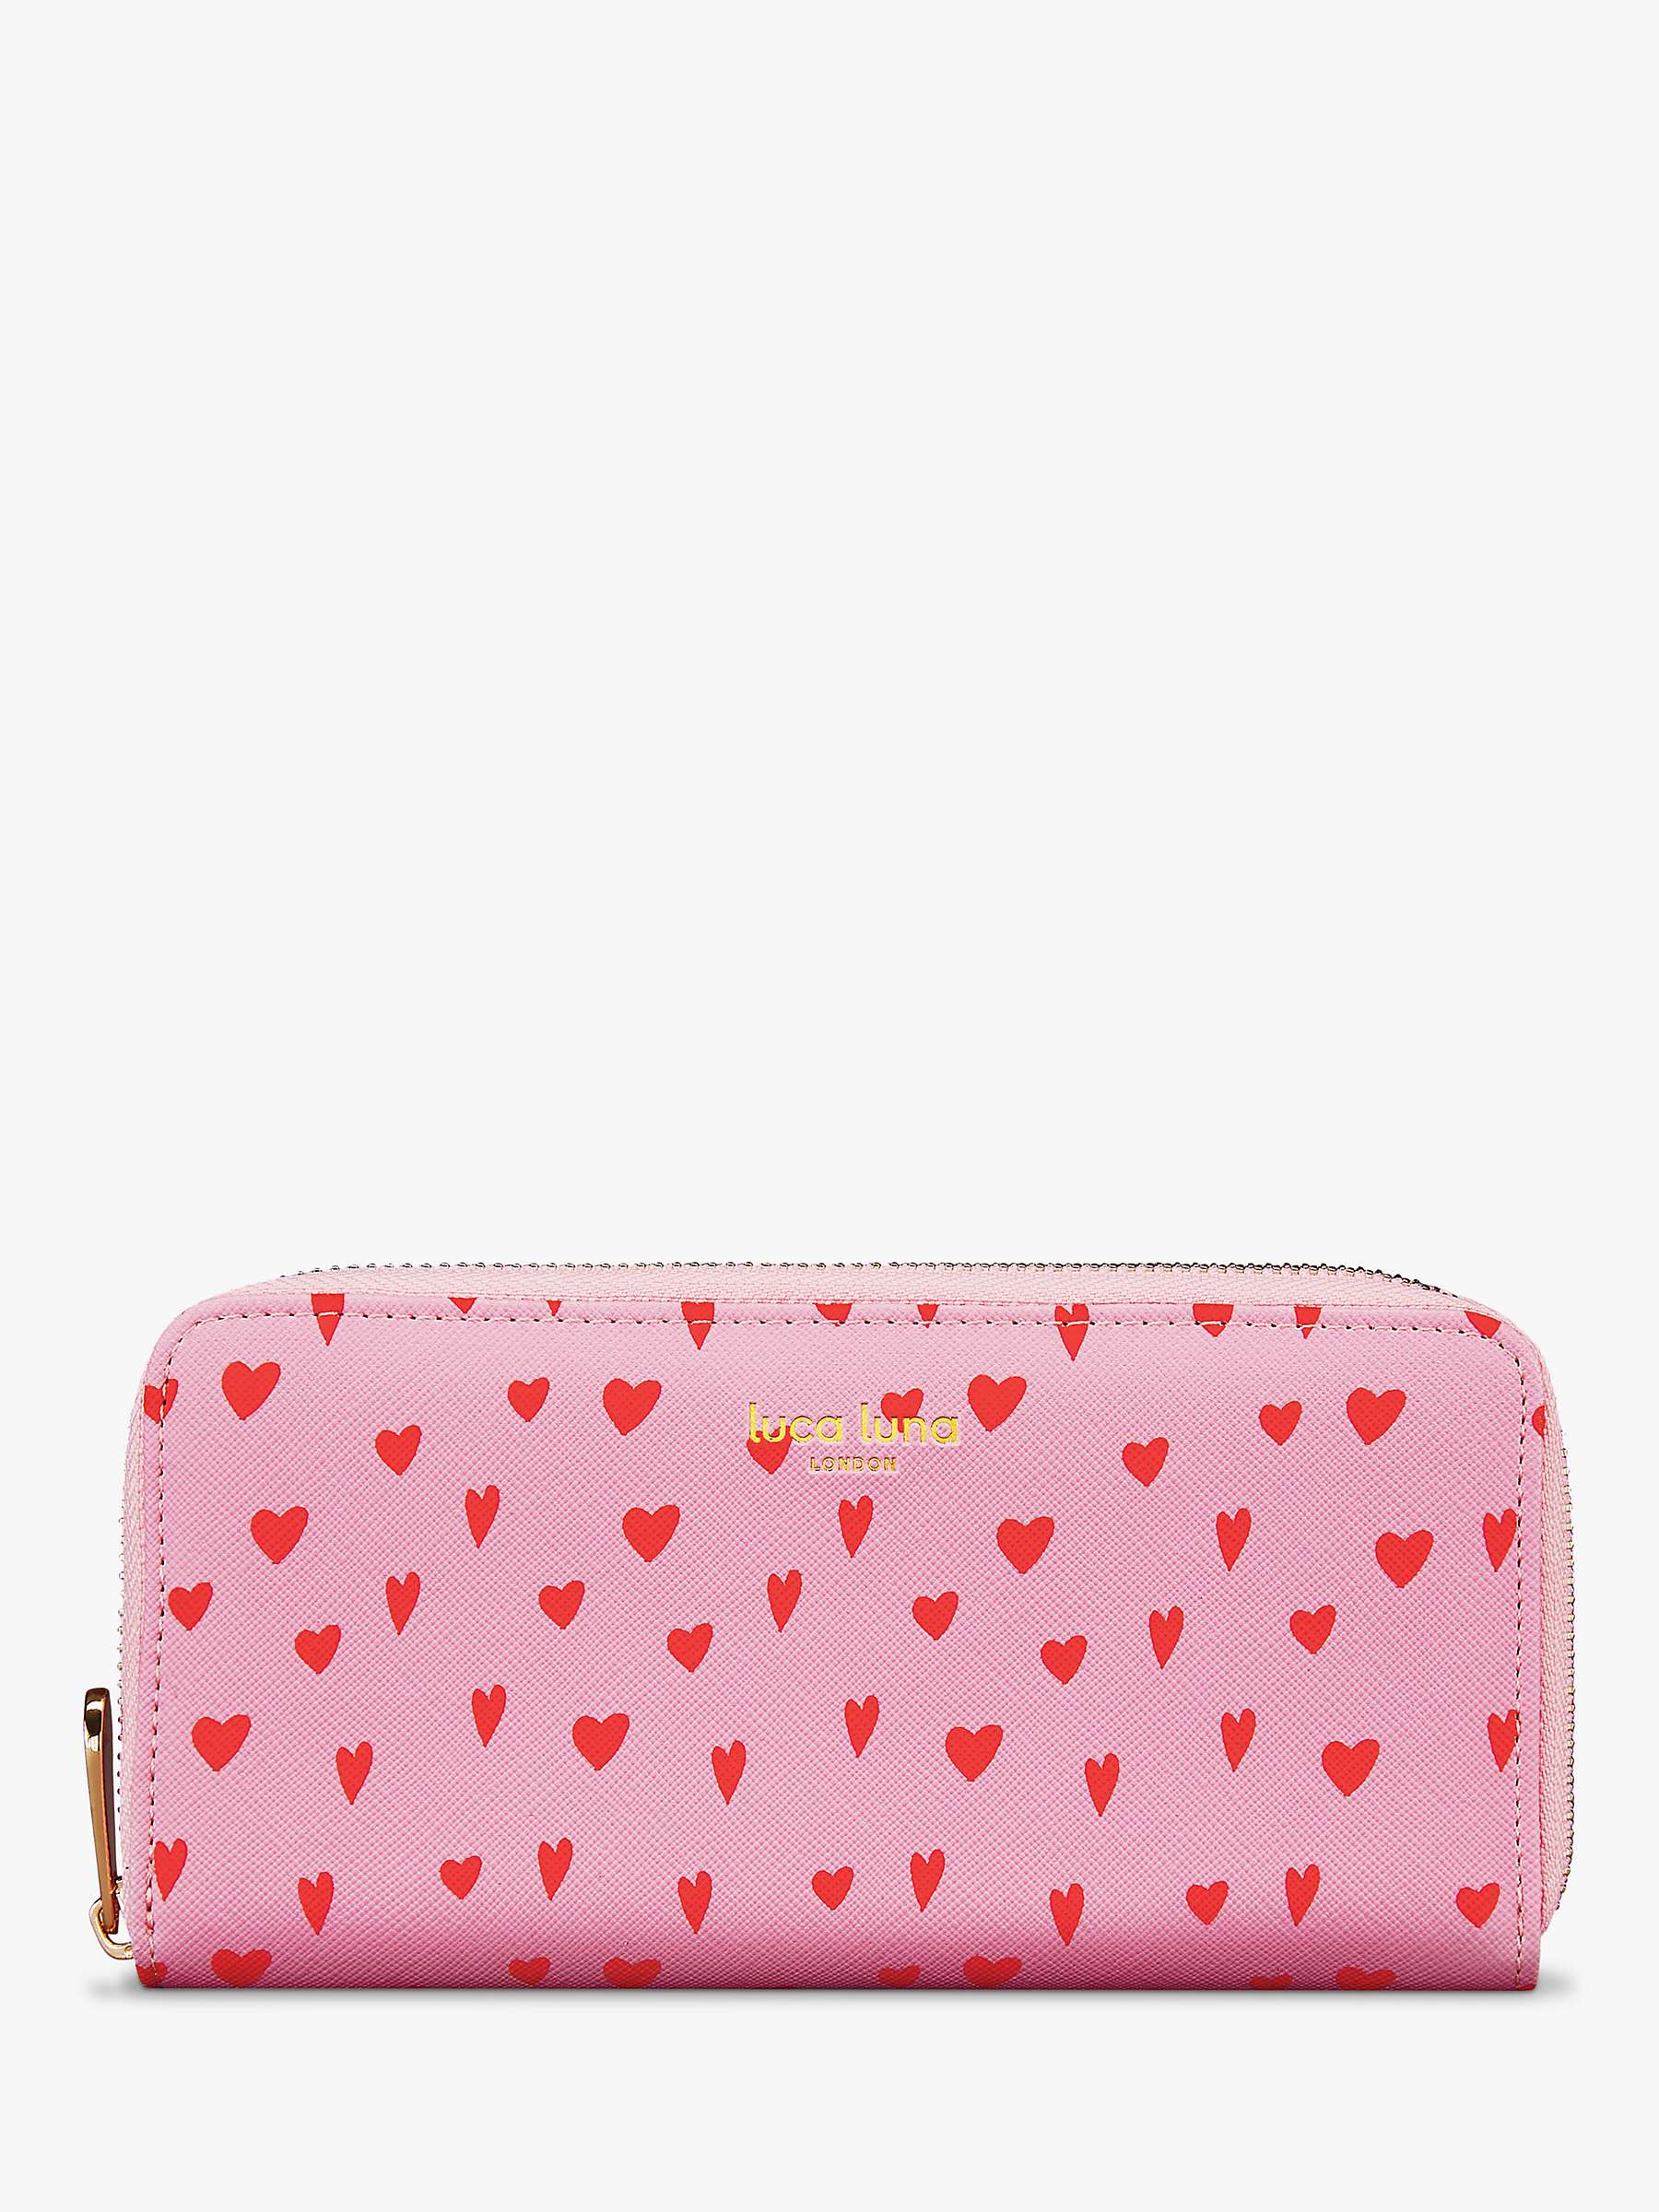 Buy Fenella Smith Luca Luna Heart Print Recycled Purse, Pink Online at johnlewis.com